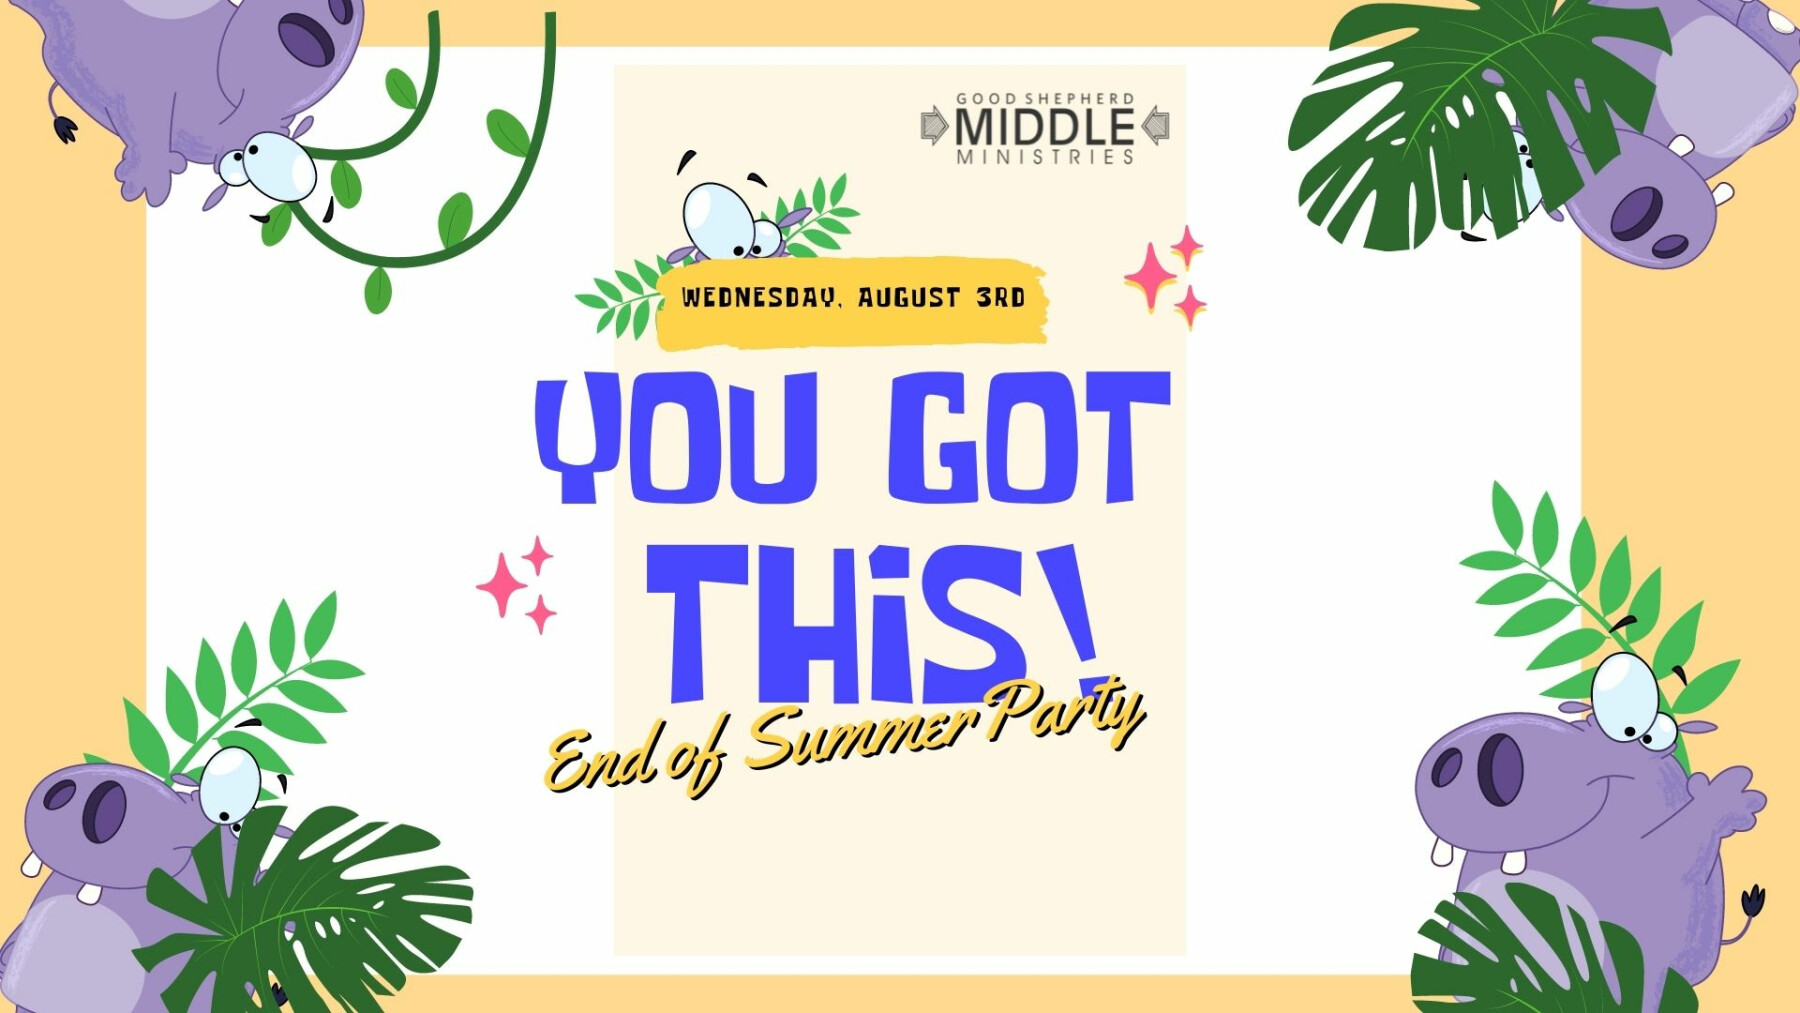 You Got This!  - Middle Ministries End of Summer Party